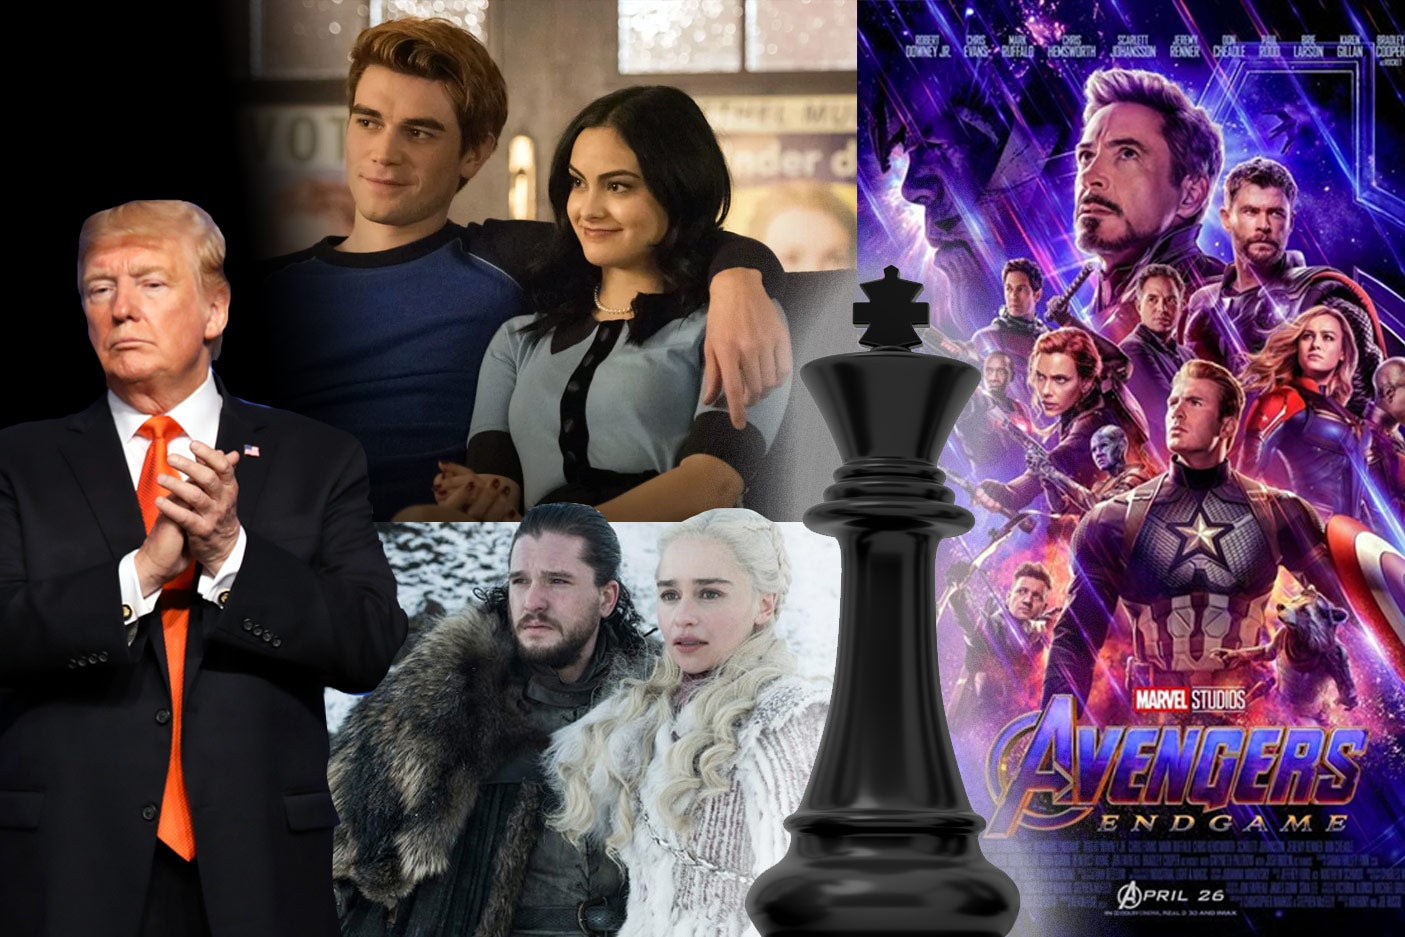 Photo collage of Donald Trump, Riverdale, Game of Thrones, Avengers: Endgame, and a chess king piece.